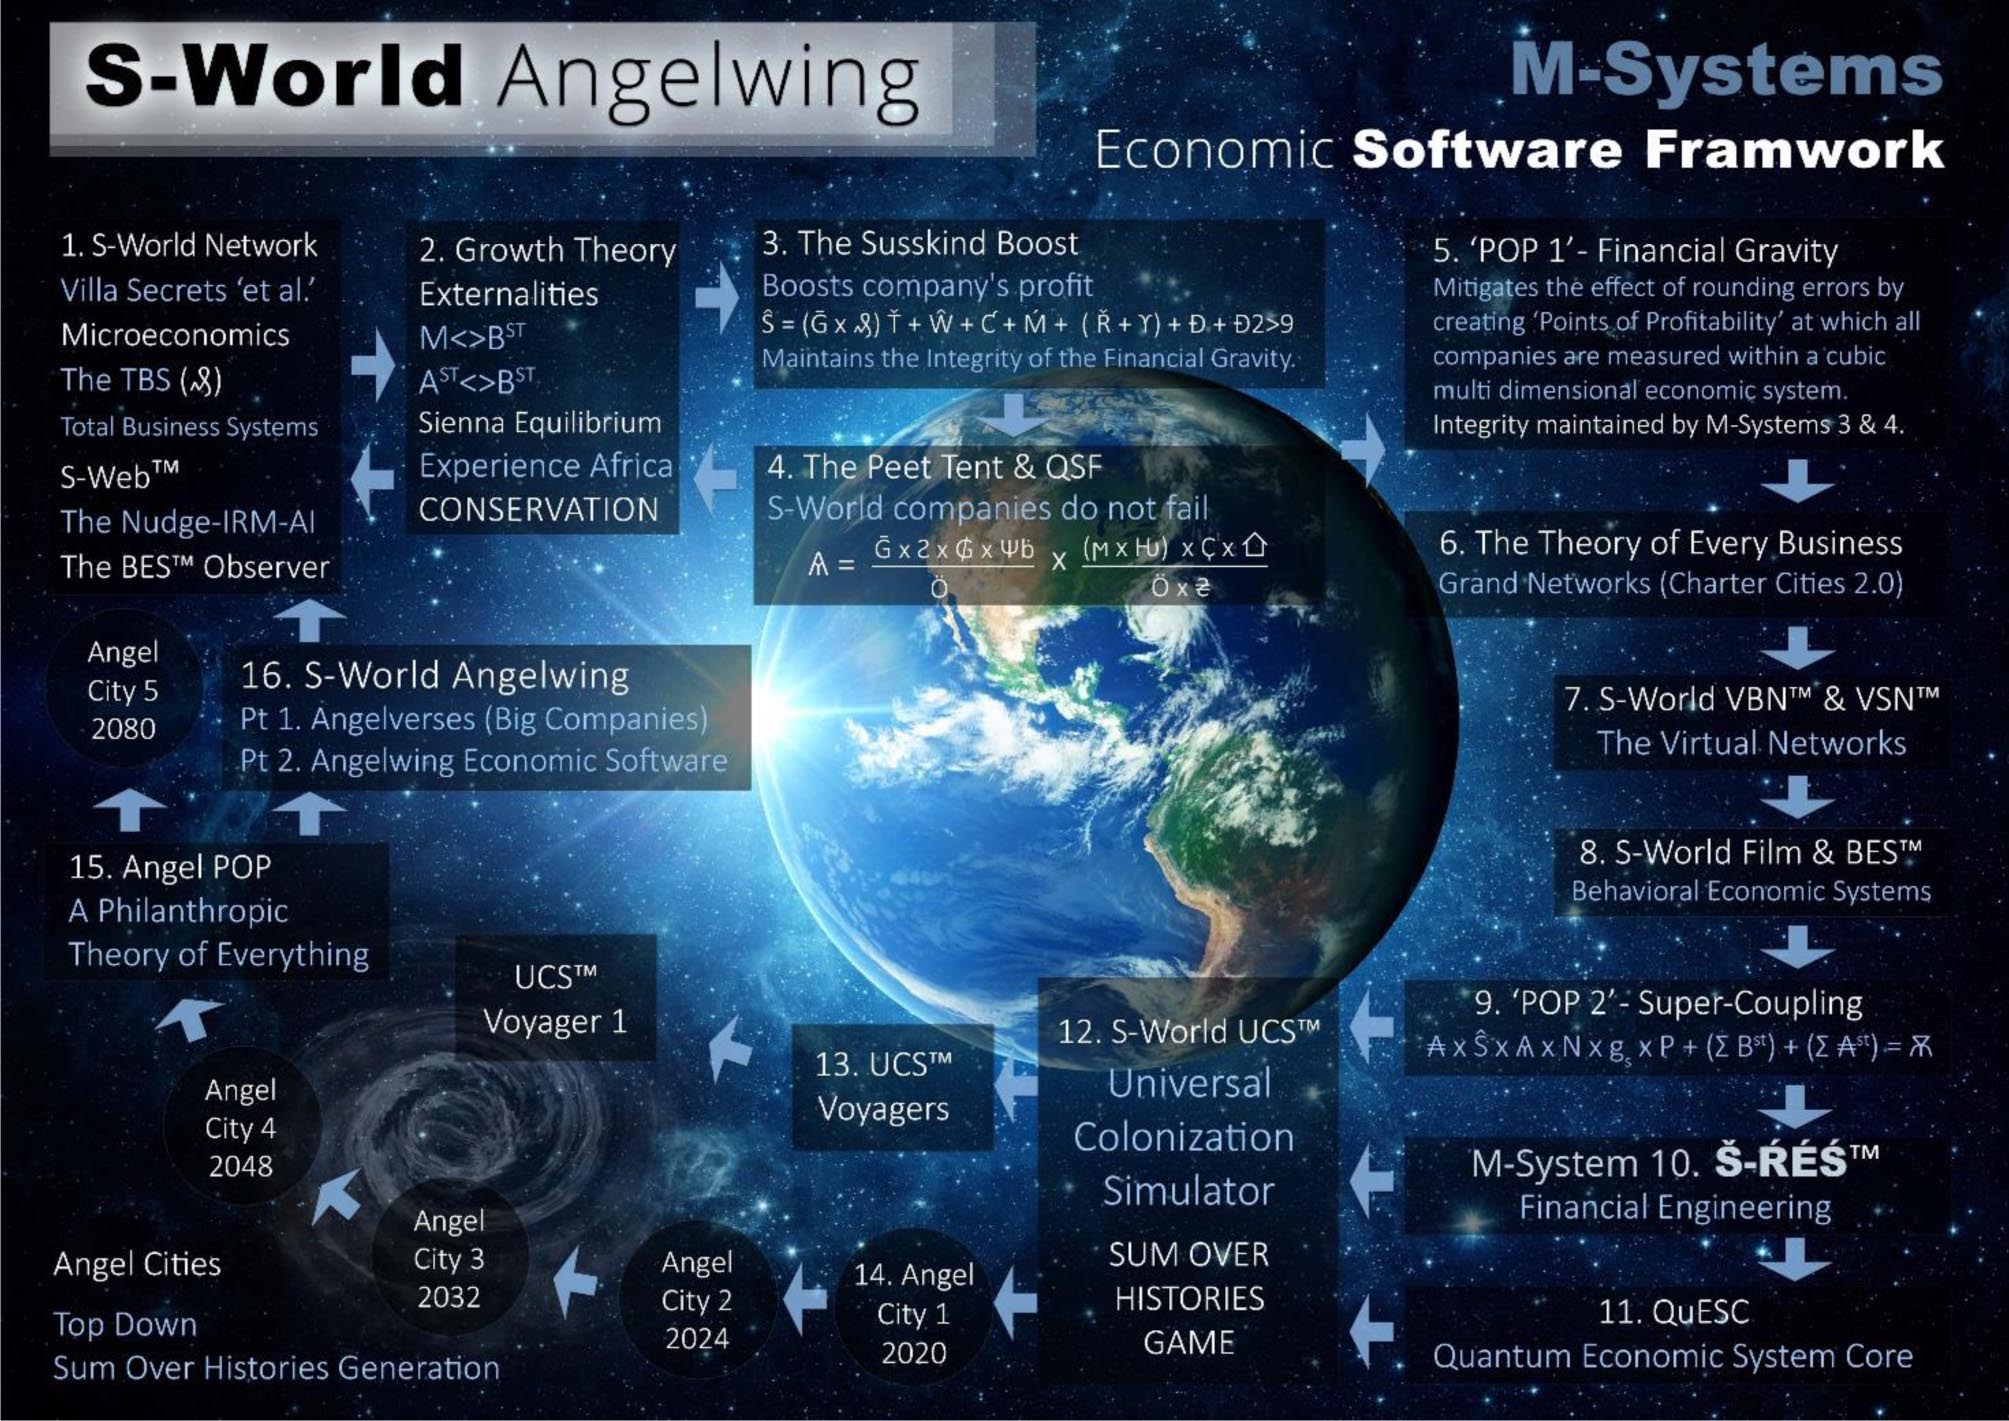 S-World Angelwing